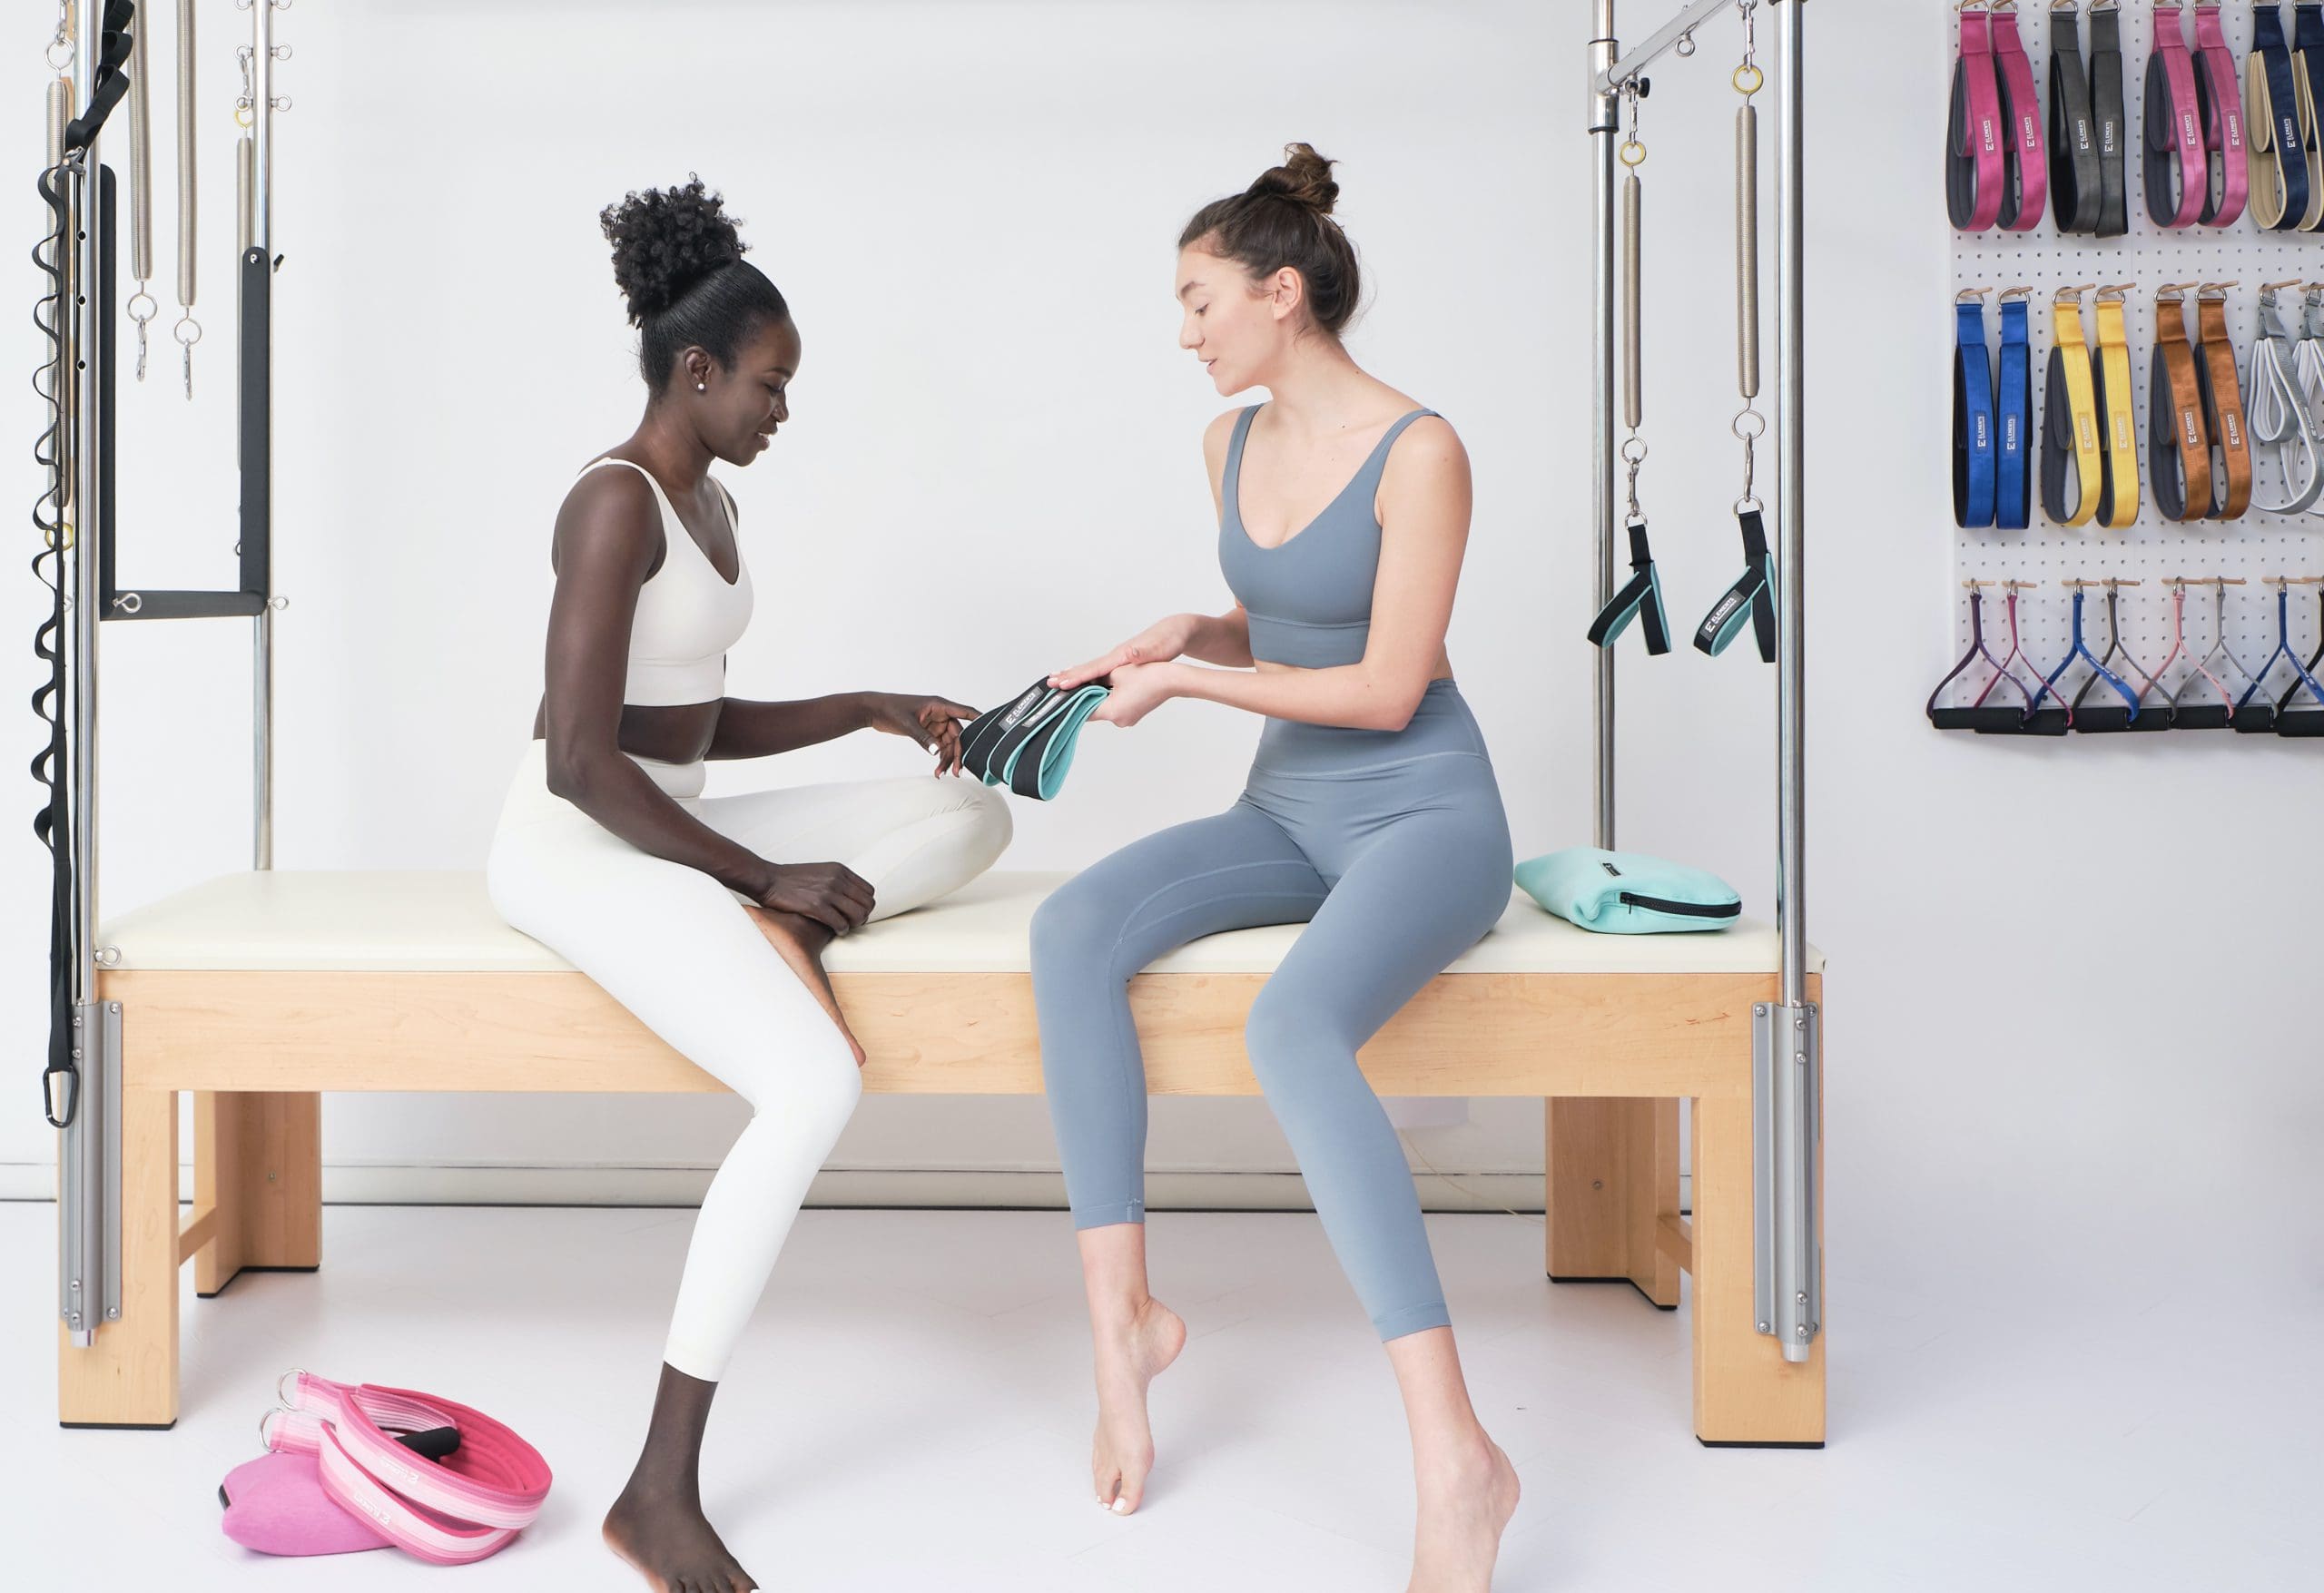 ELEMENTS - Have your own Pilates Straps